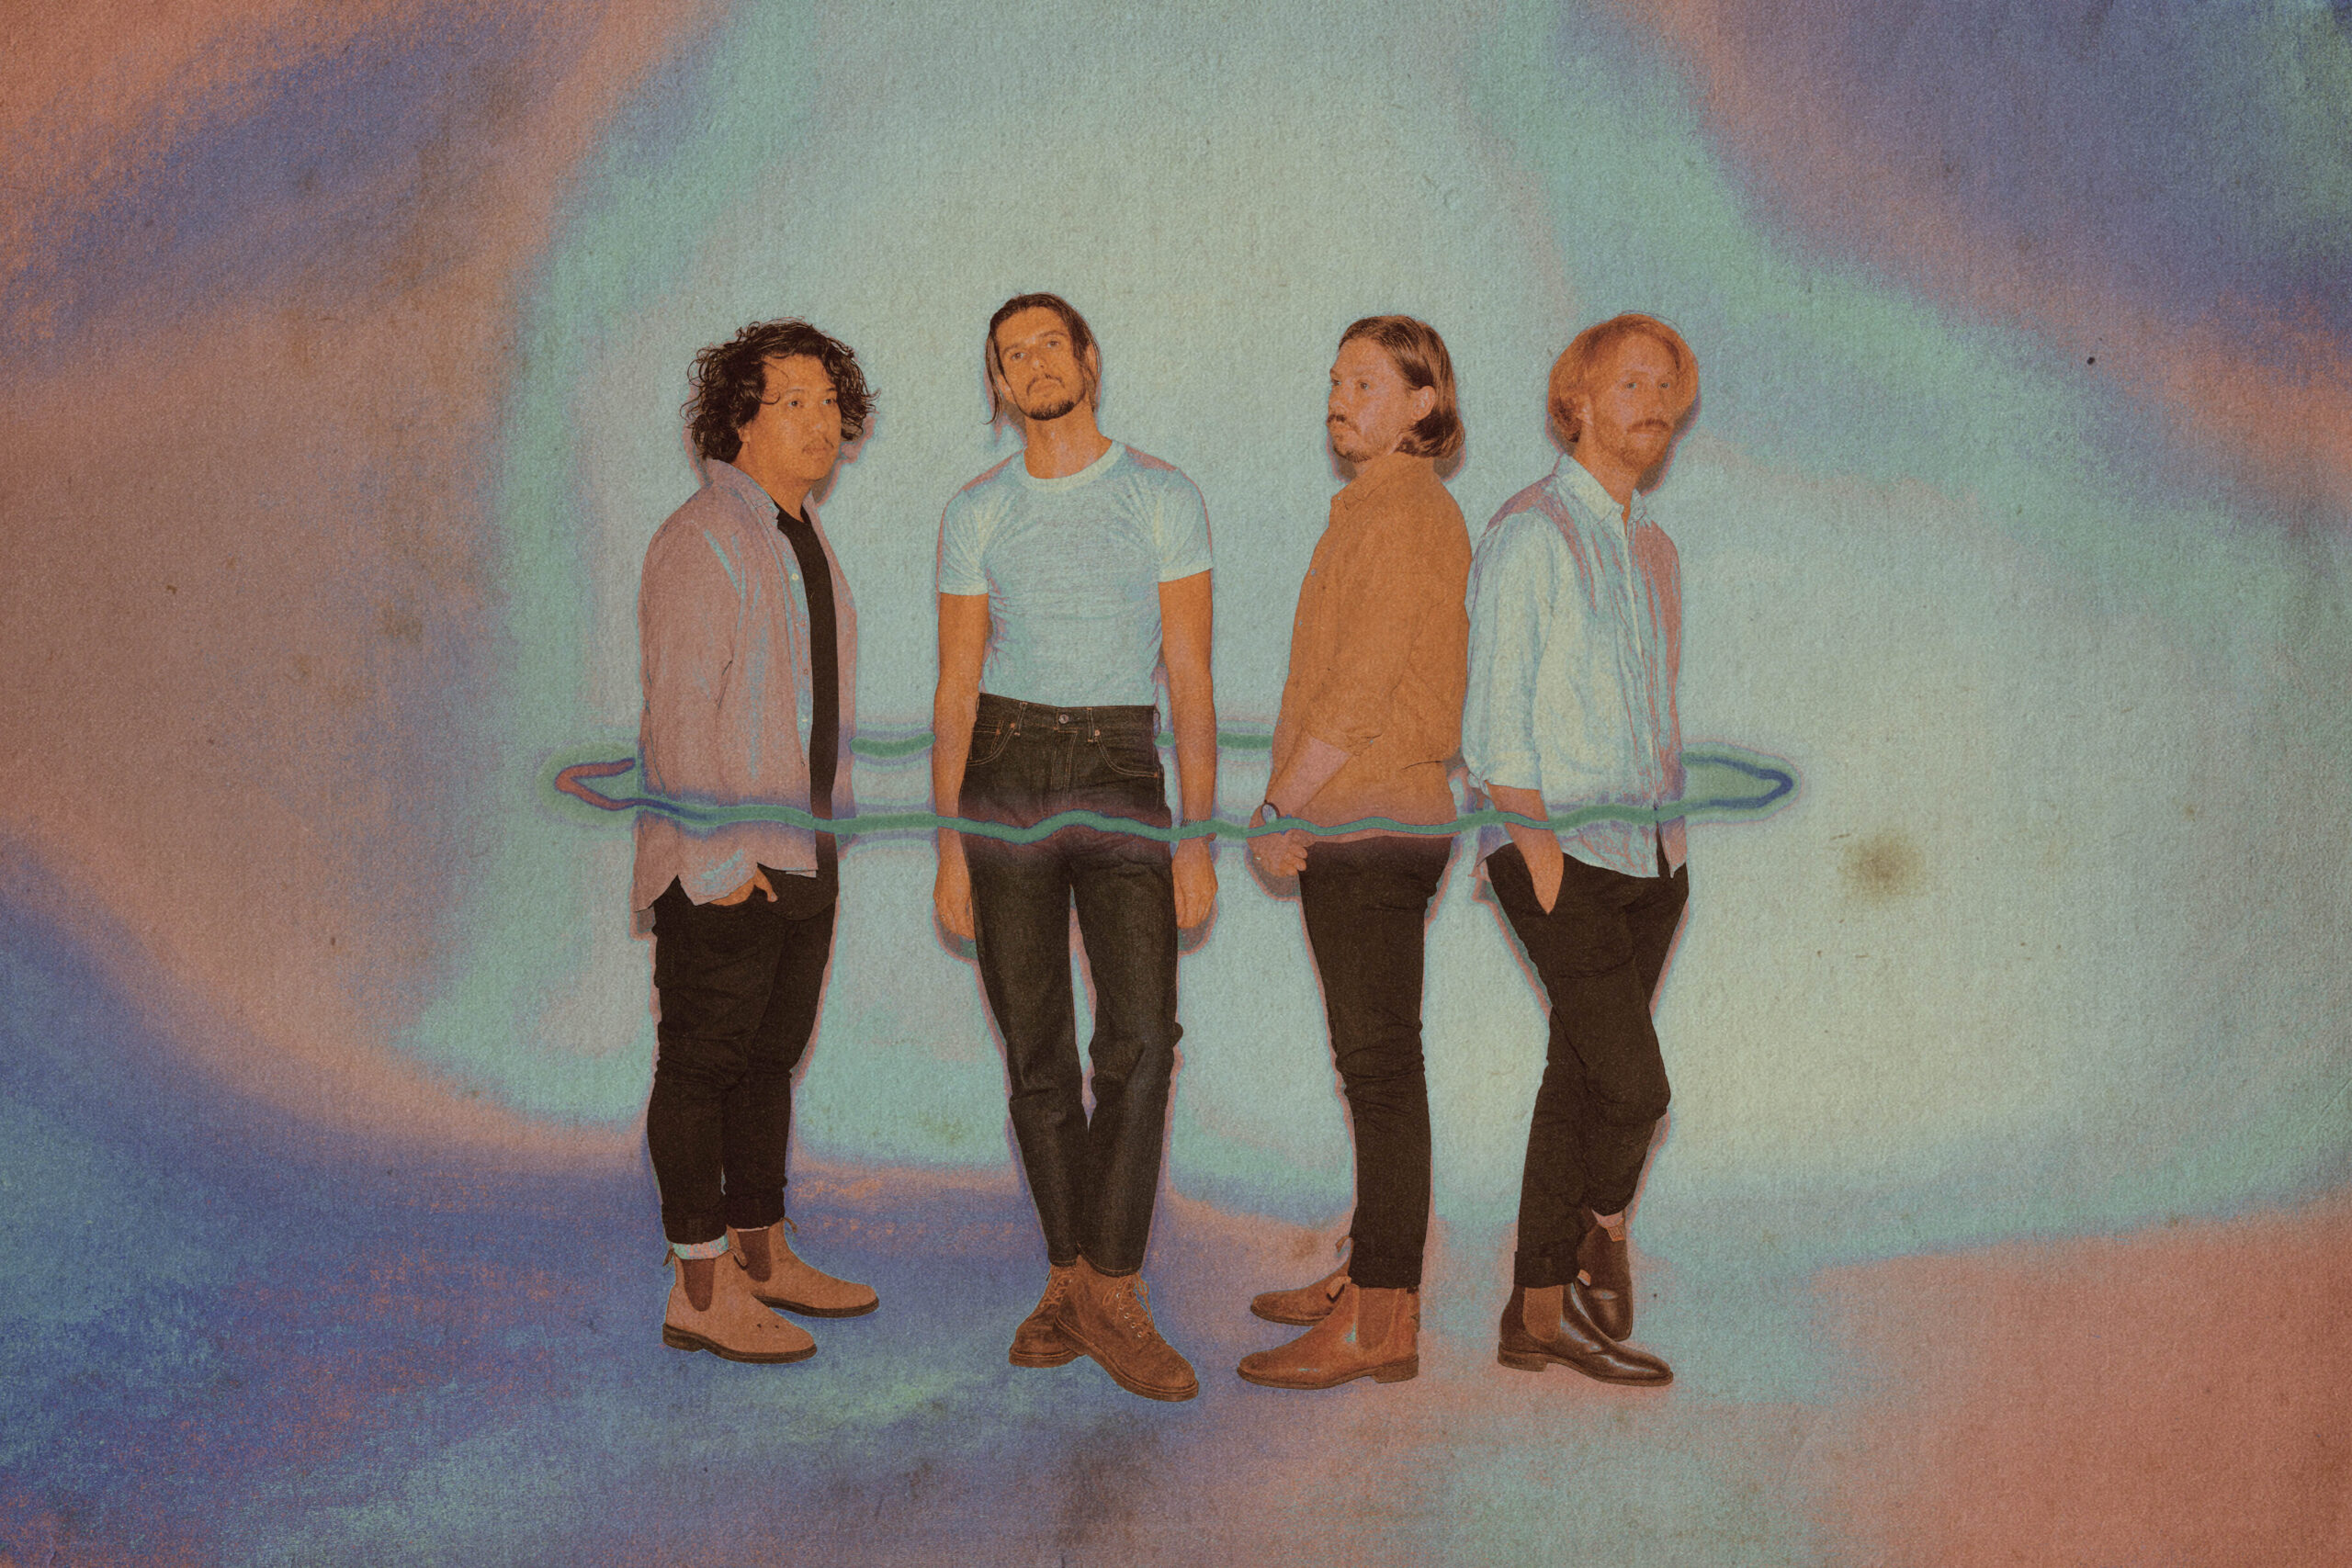 TINY LITTLE HOUSES NEW ALBUM ‘MISERICORDE’ – OUT NOW + 2022 TOUR DATES ANNOUNCED